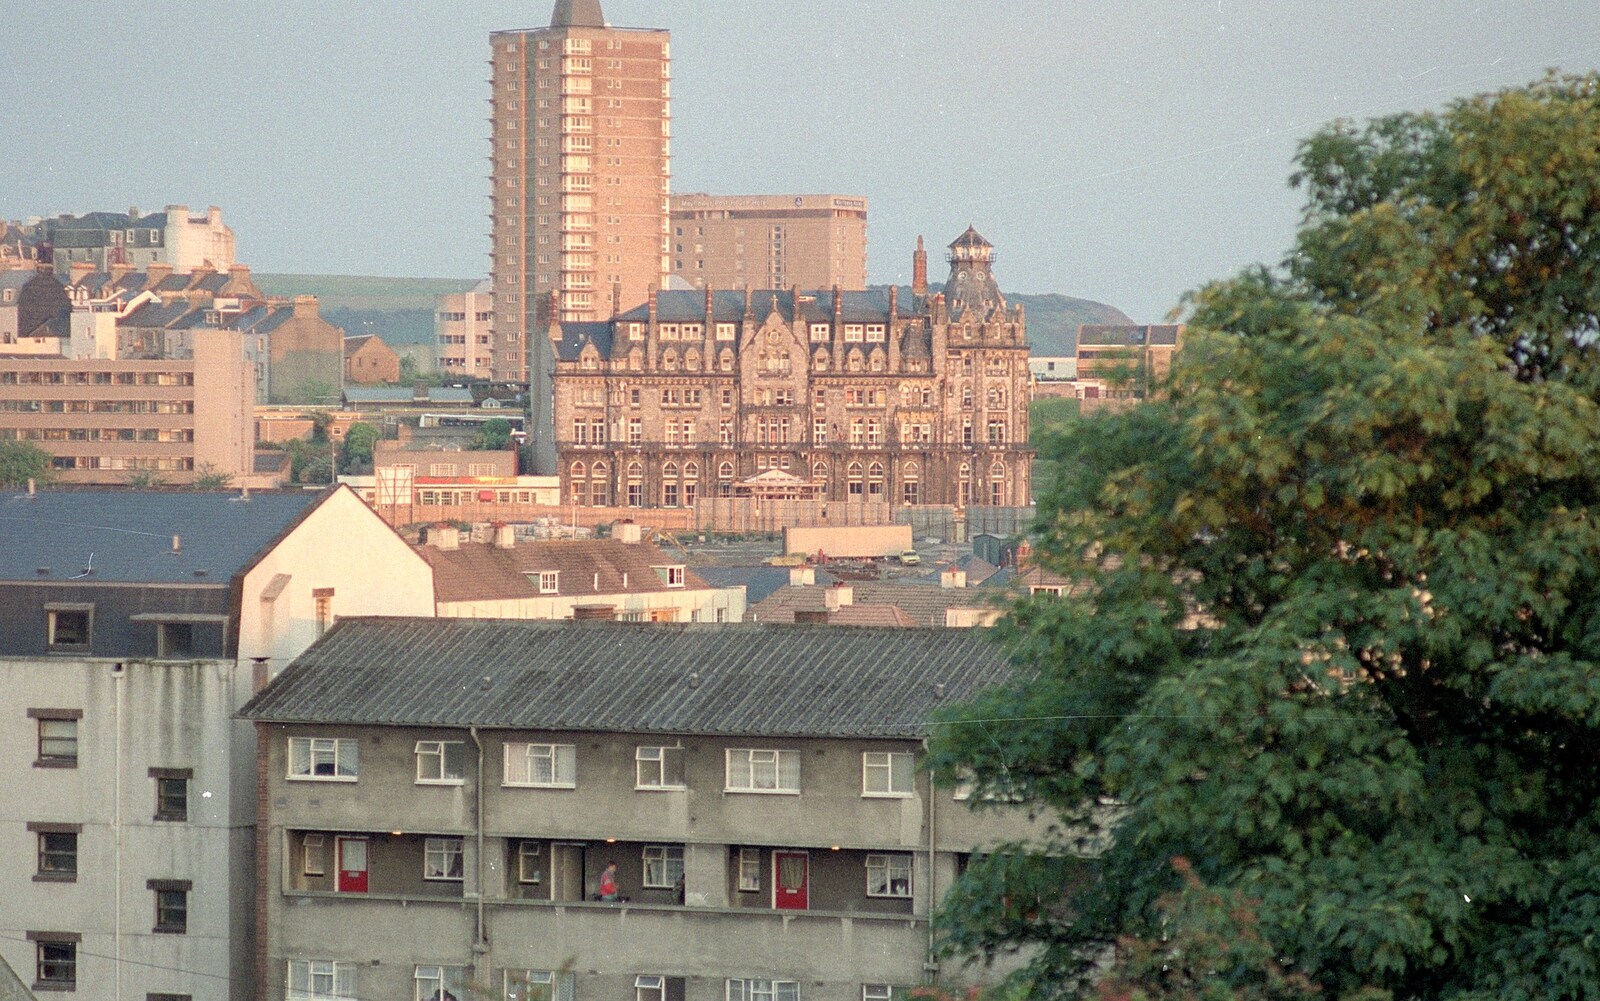 A view of some nearby flats from Uni: Views From St. Peter's Church Tower, Wyndham Square, Plymouth, Devon - 15th June 1989